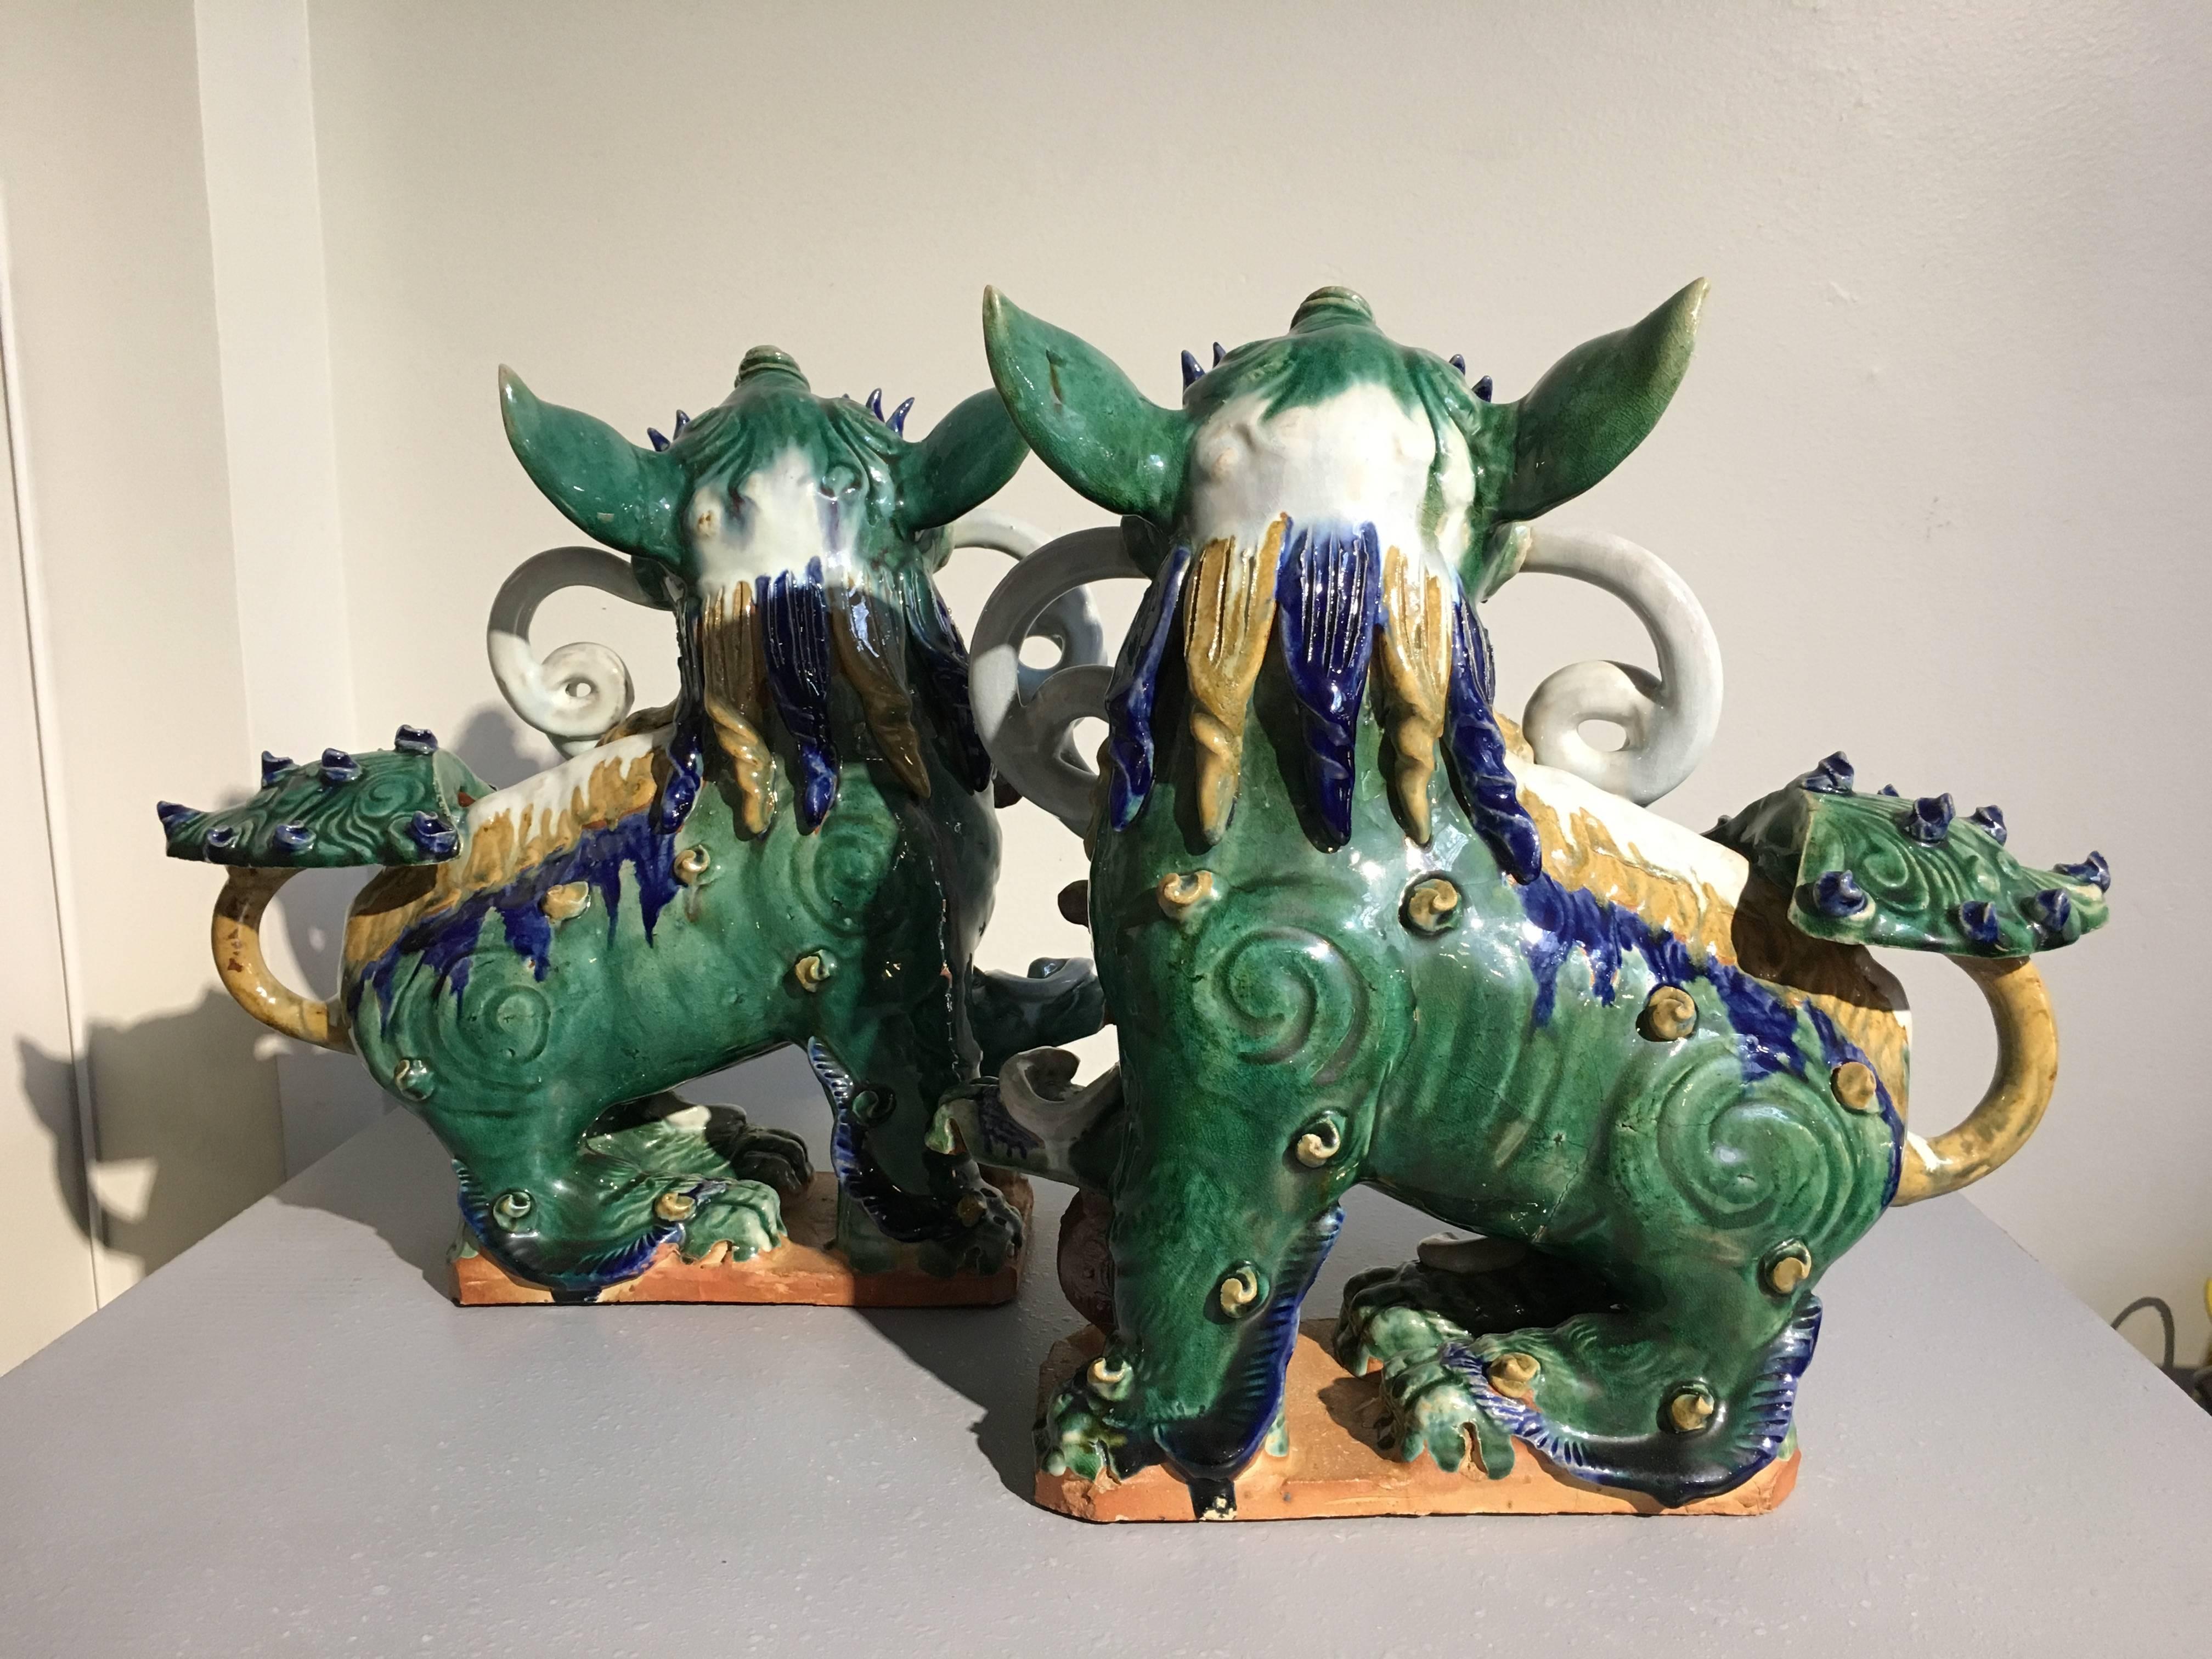 A delightful pair of Chinese pottery foo dogs or lions glazed in vibrant green, with blue, yellow and white highlights. 
Both are portrayed standing, with heads turned and holding streaming banners adorned with flowers in their mouths. They have